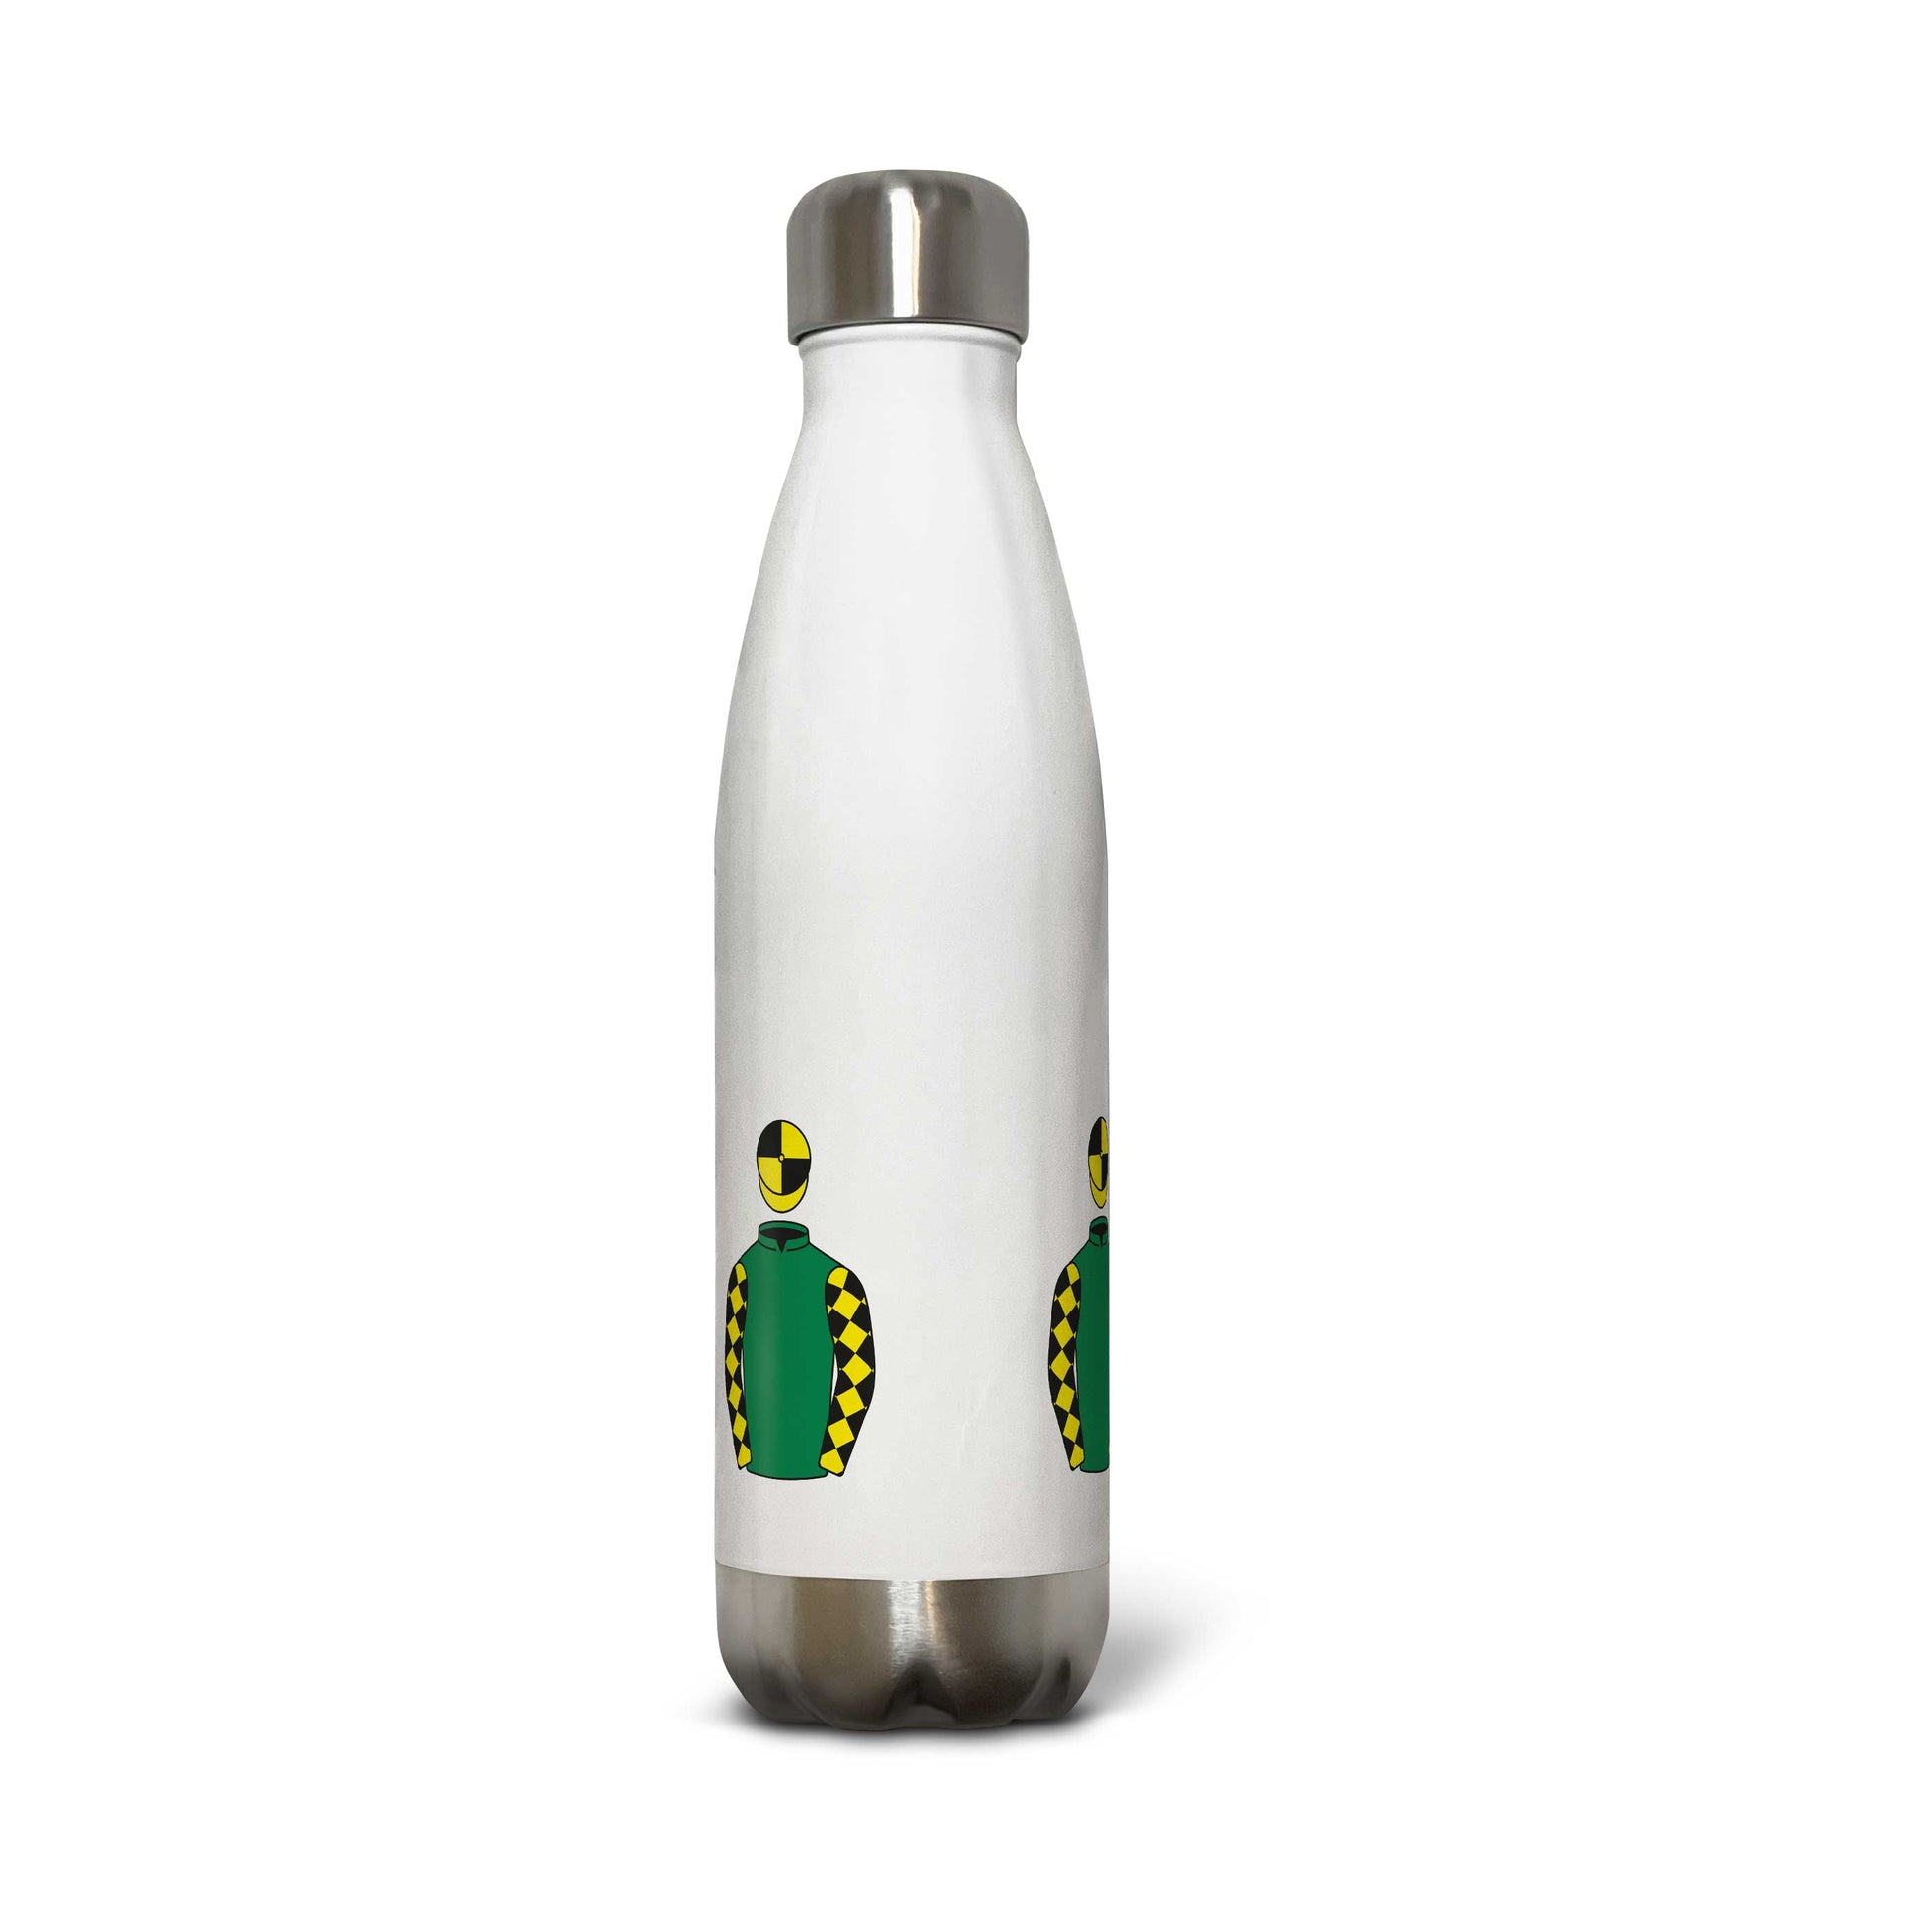 Racing For Fun Horse Racing Drinks Bottle - Hacked Up Horse Racing Gifts